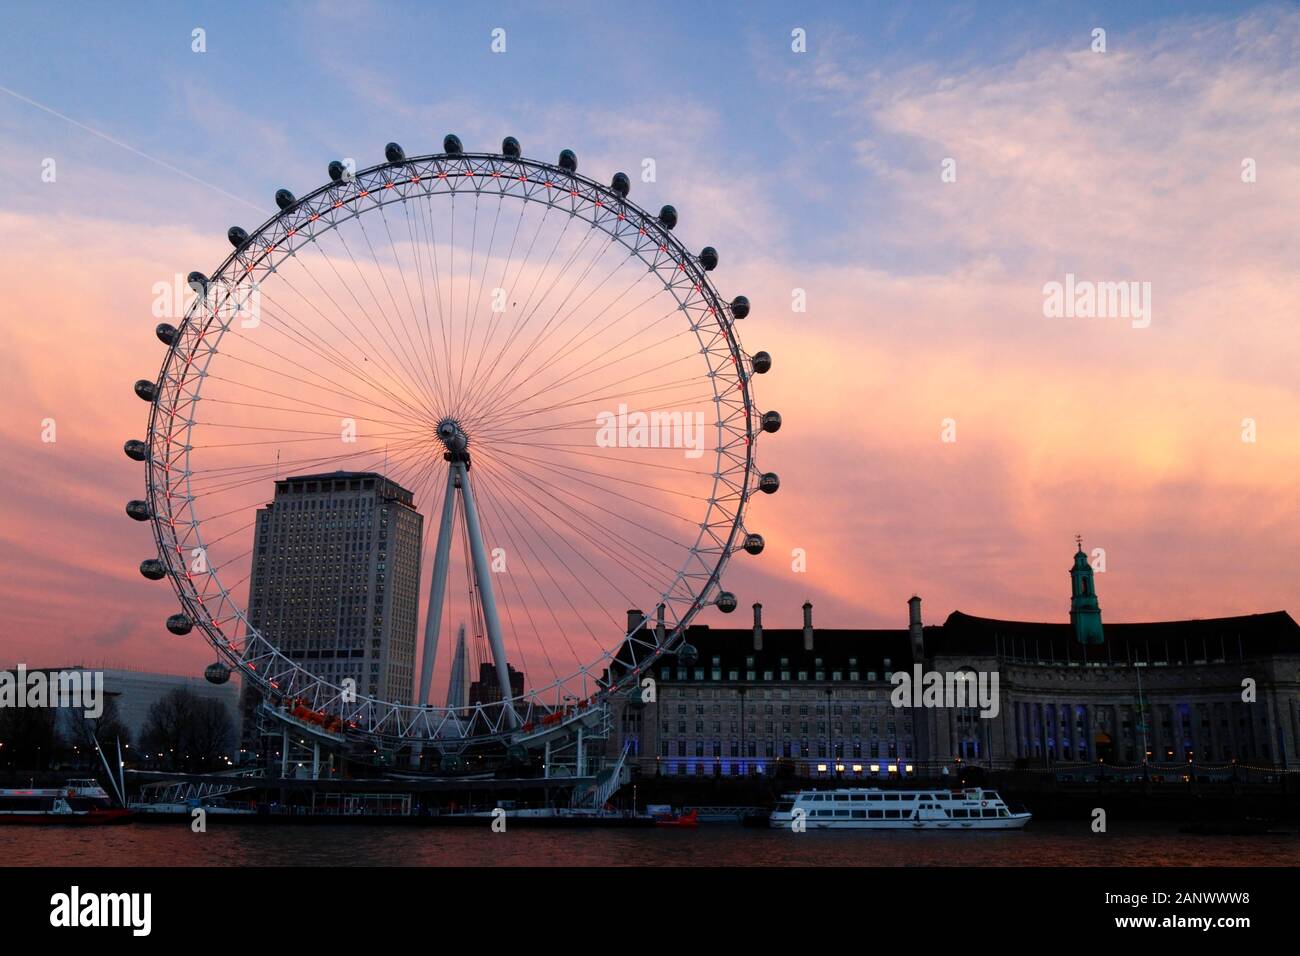 London Eye, Shell Centre building and County Hall at sunset, London, England Stock Photo